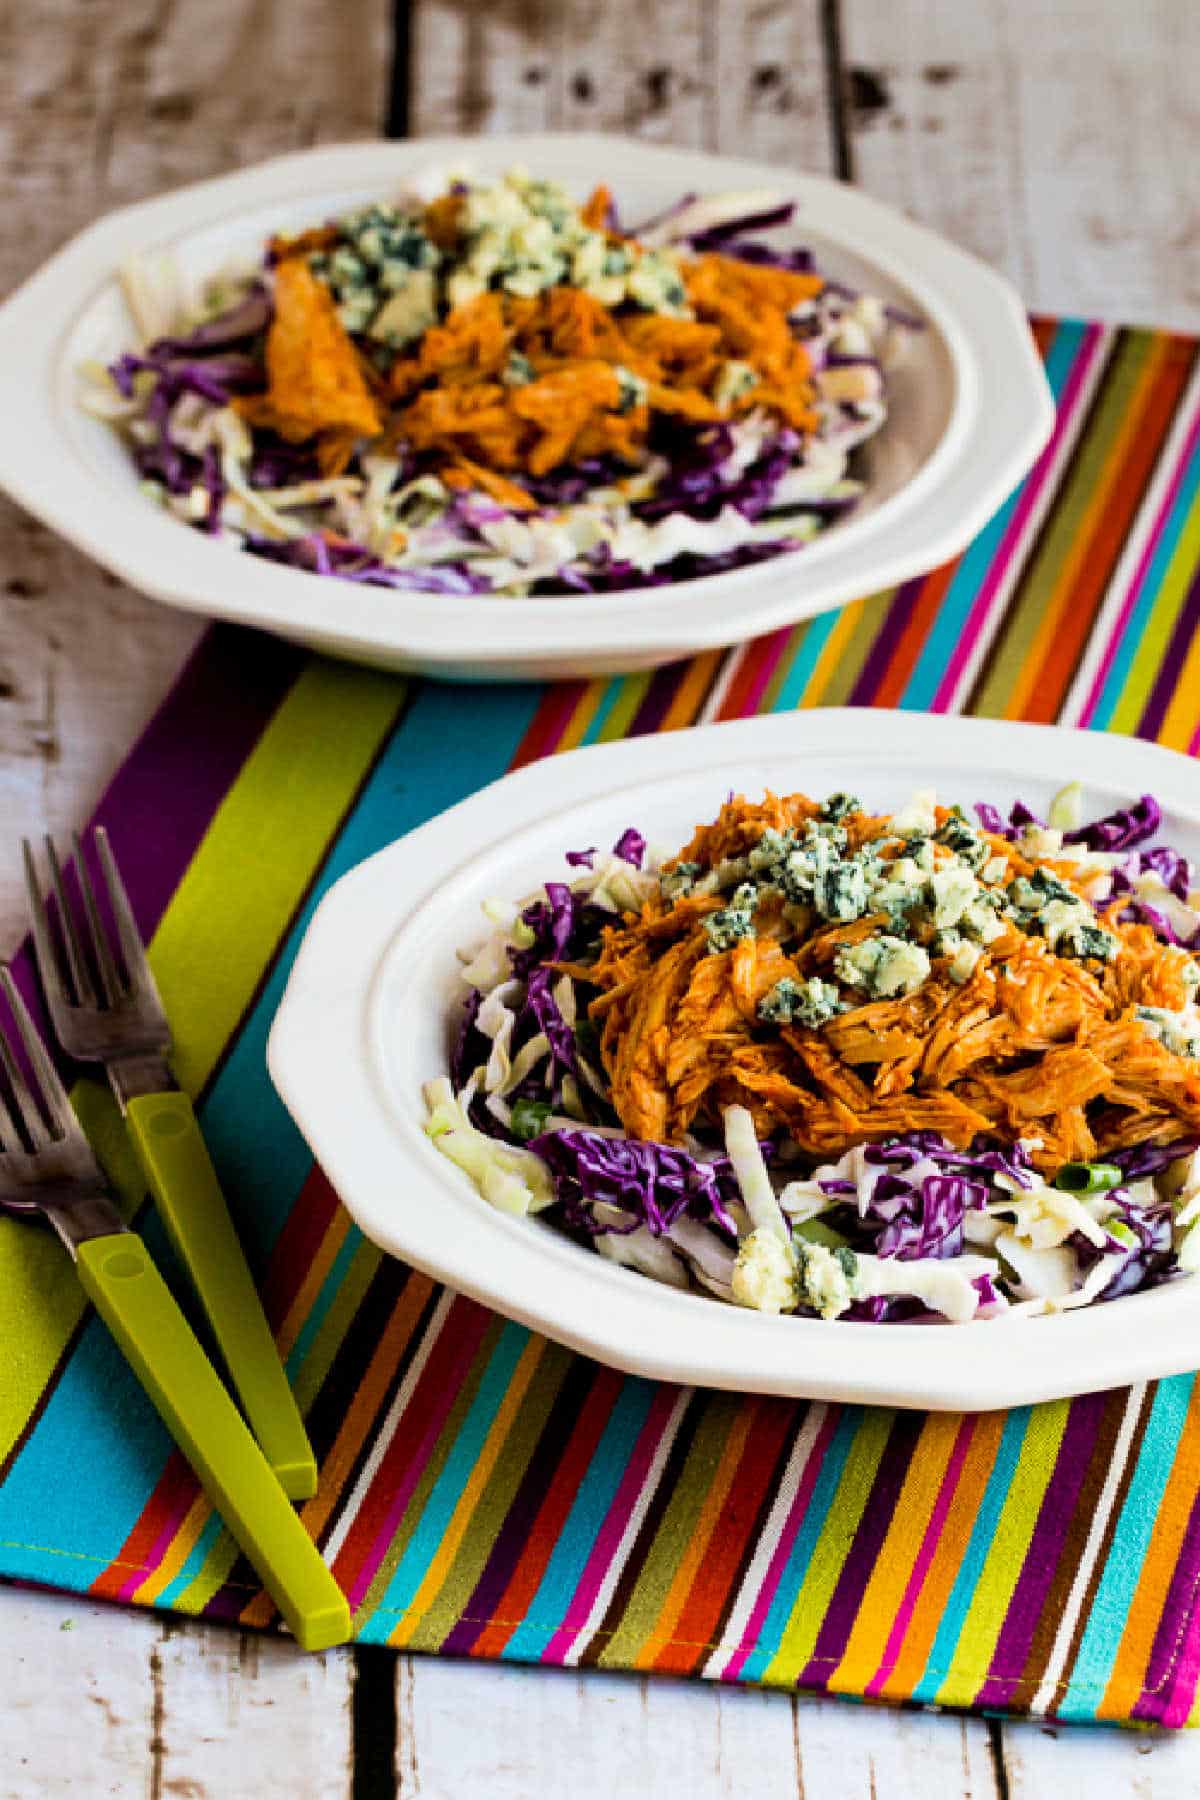 two buffalo chicken bowls on striped napkin with green forks